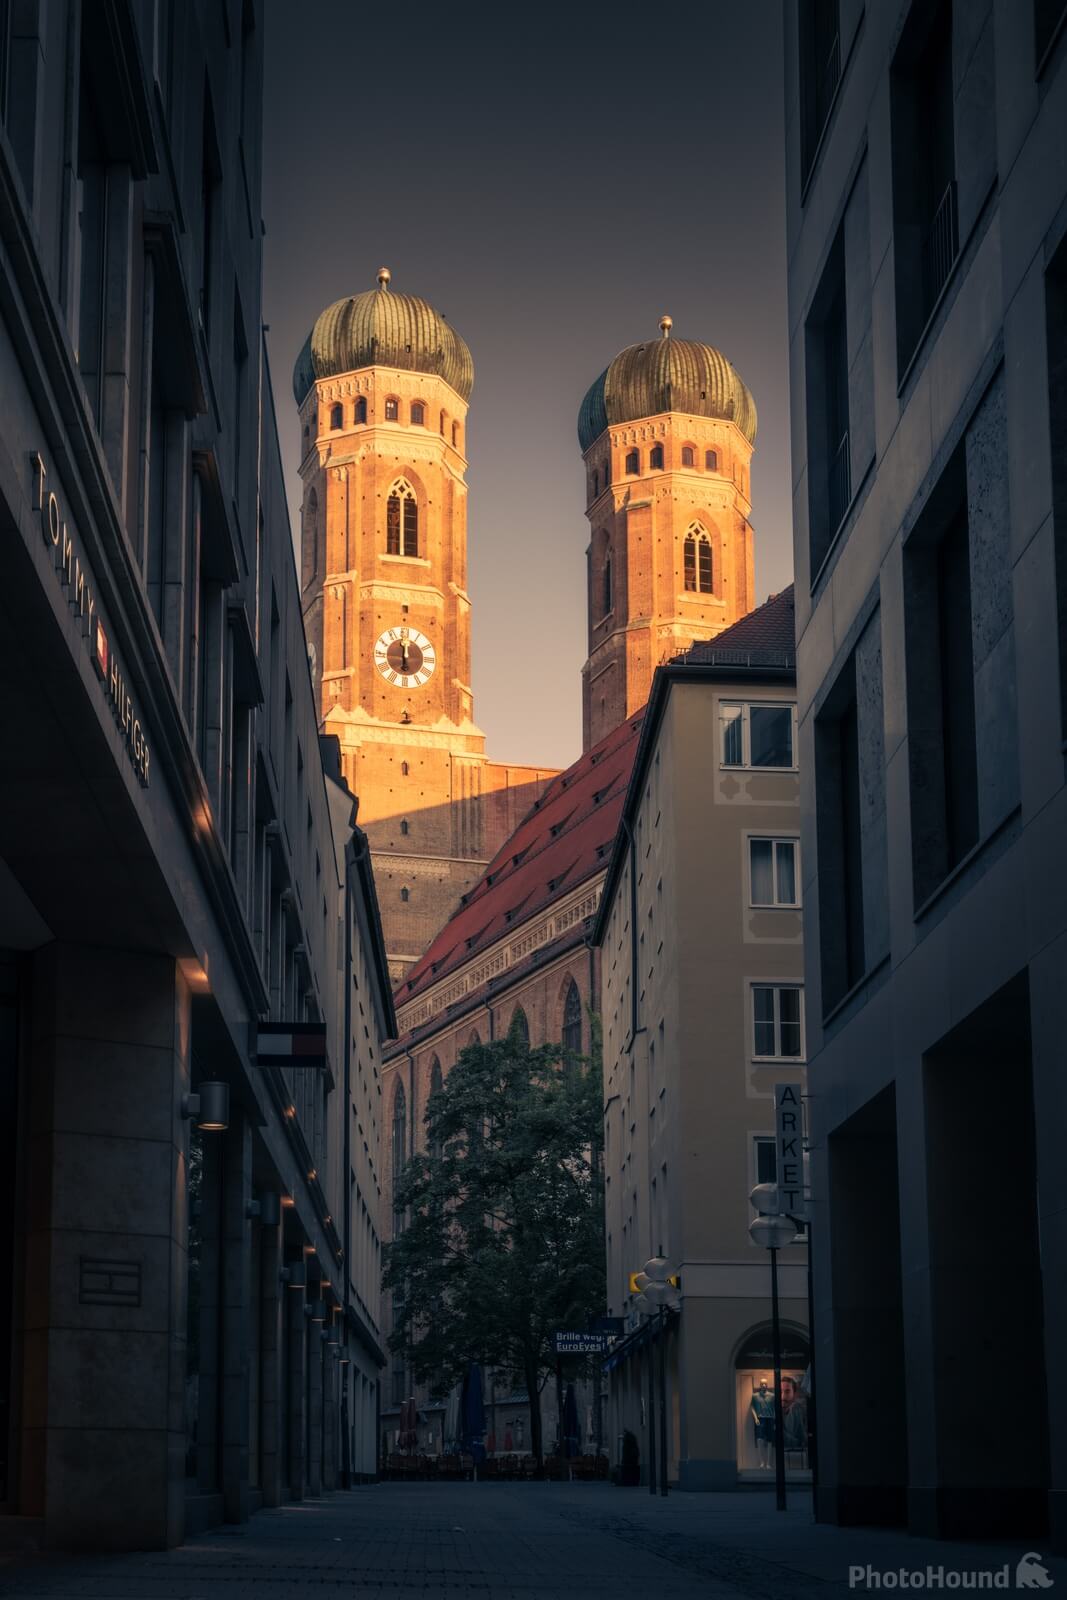 Image of Frauenkirche, München by Michael Unruh